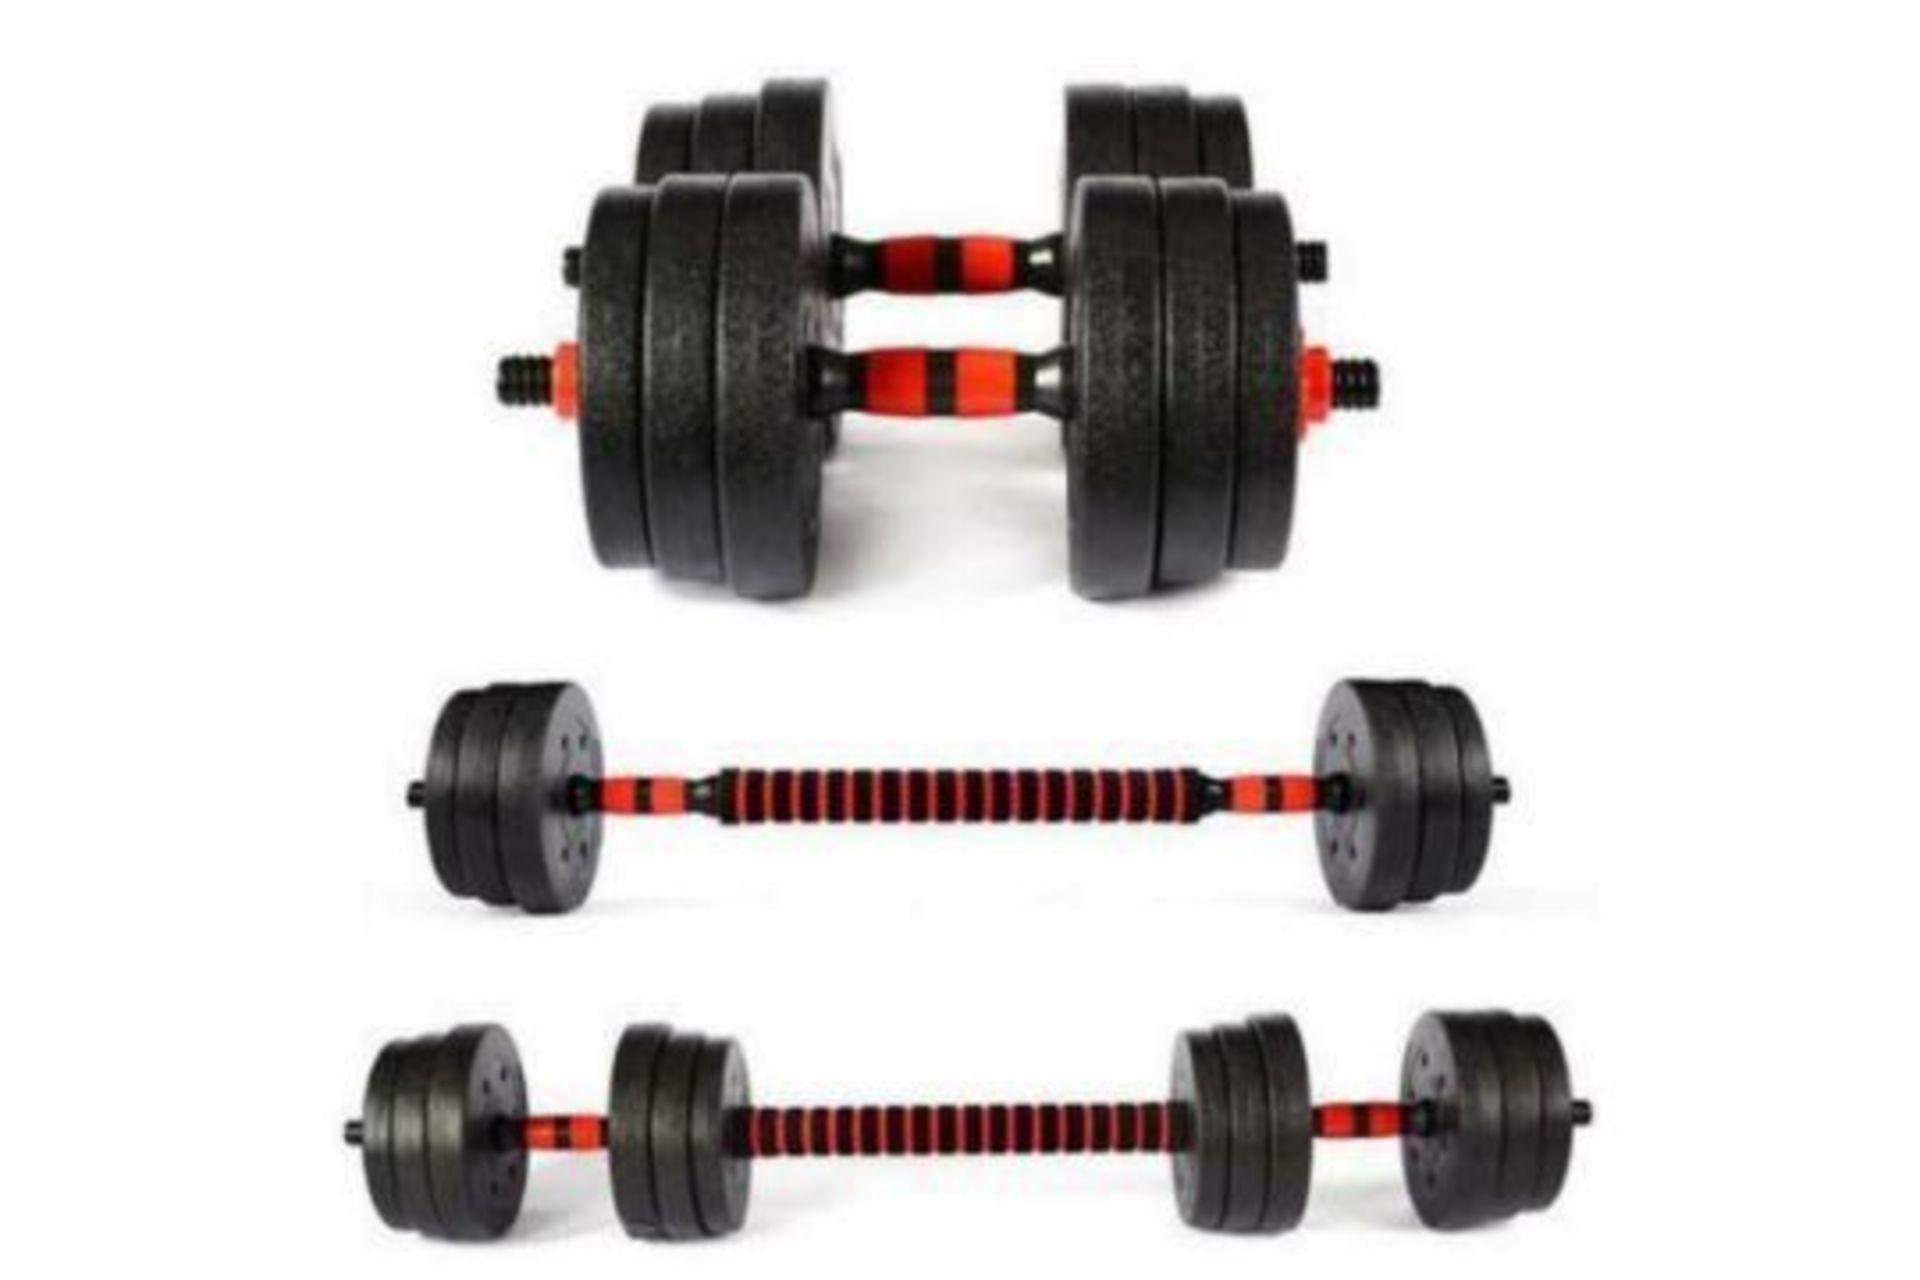 2 X BRAND NEW 20KG BARBELL DUMBBELL BODY BUILDING SETS R13-7